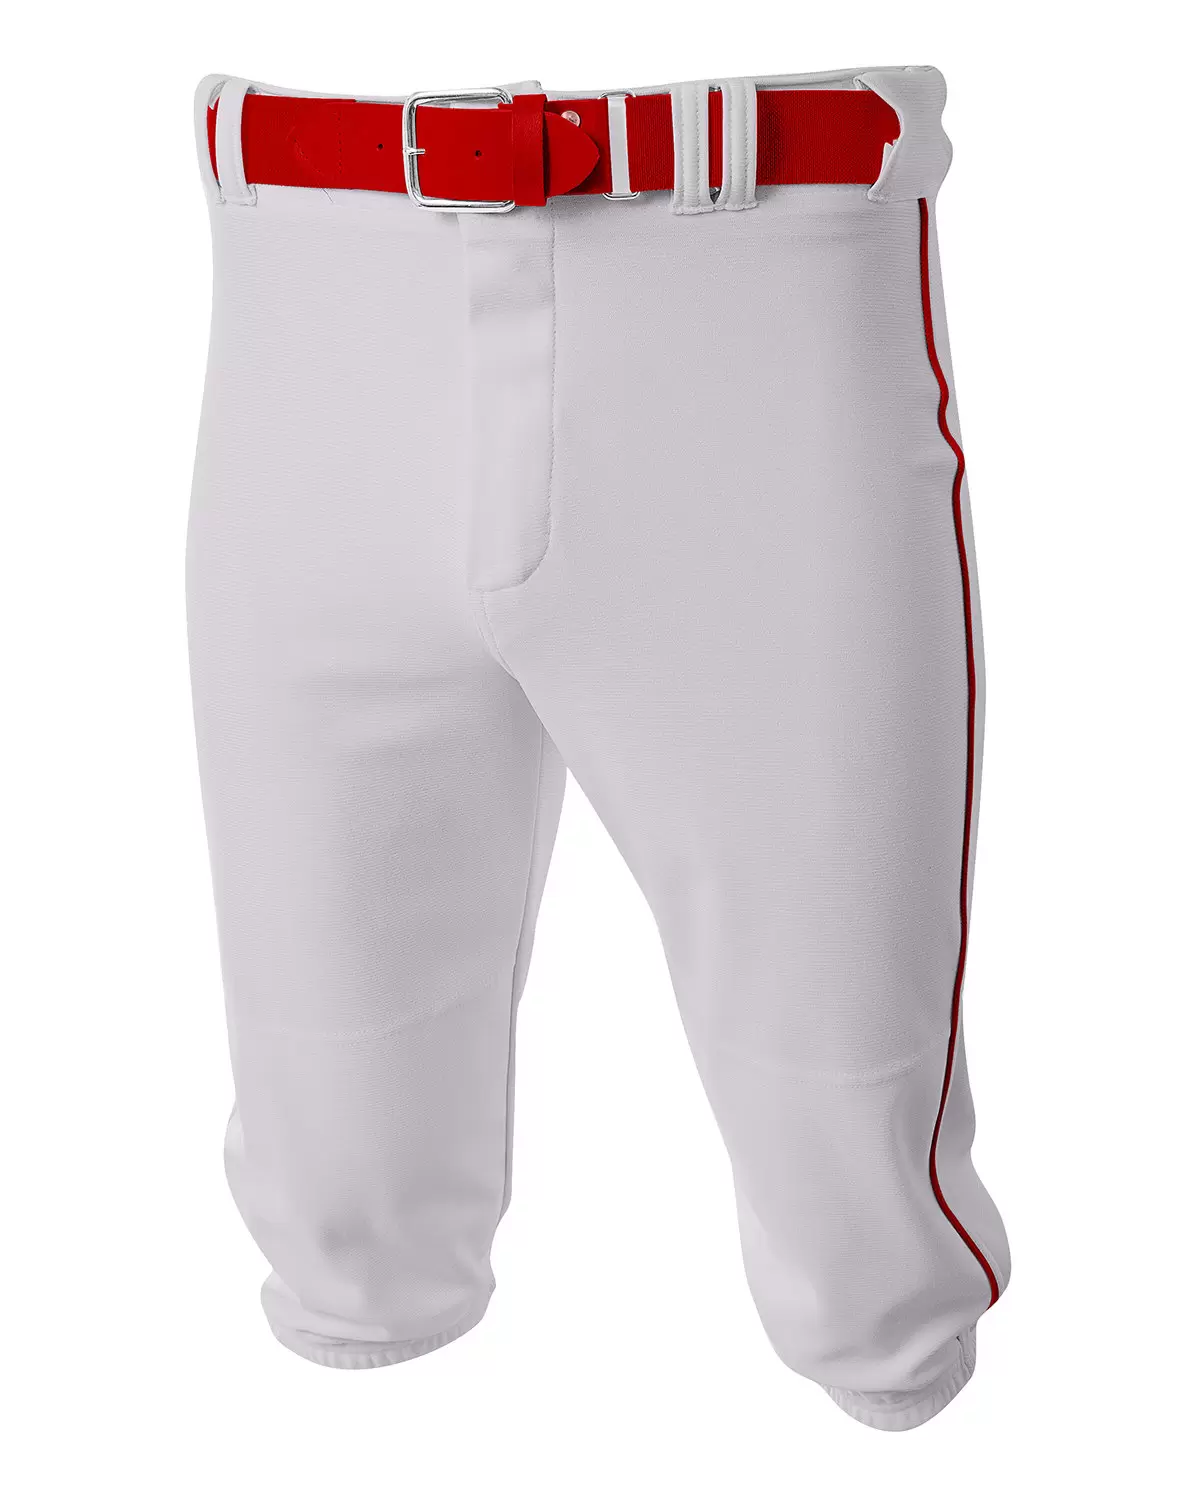 A4 Apparel NB6003 Youth Baseball Knicker Pants - From $18.63